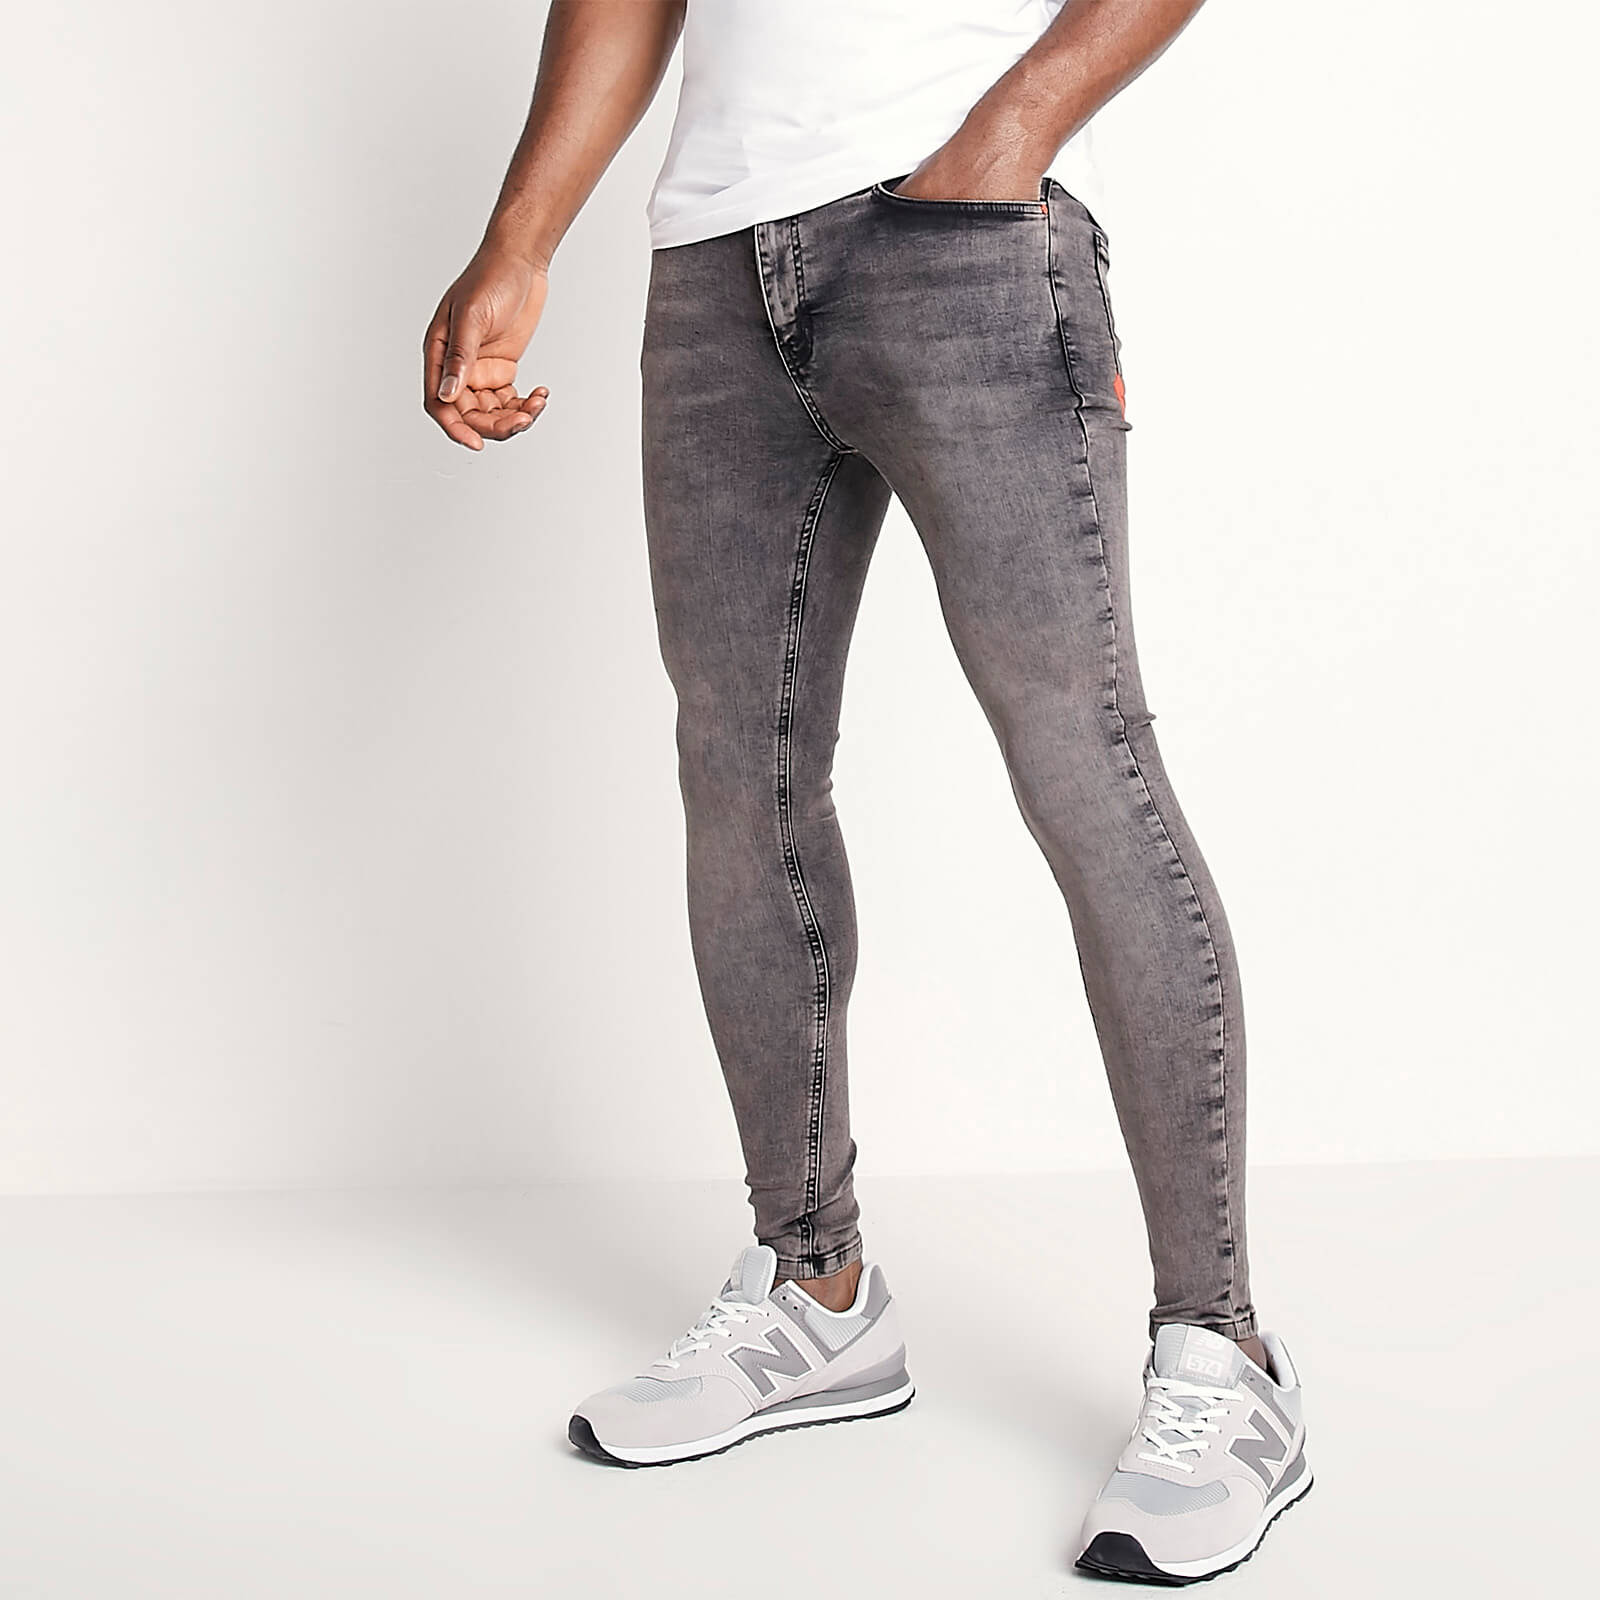 sustainable stretch jeans skinny fit – grey wash - w28/l32